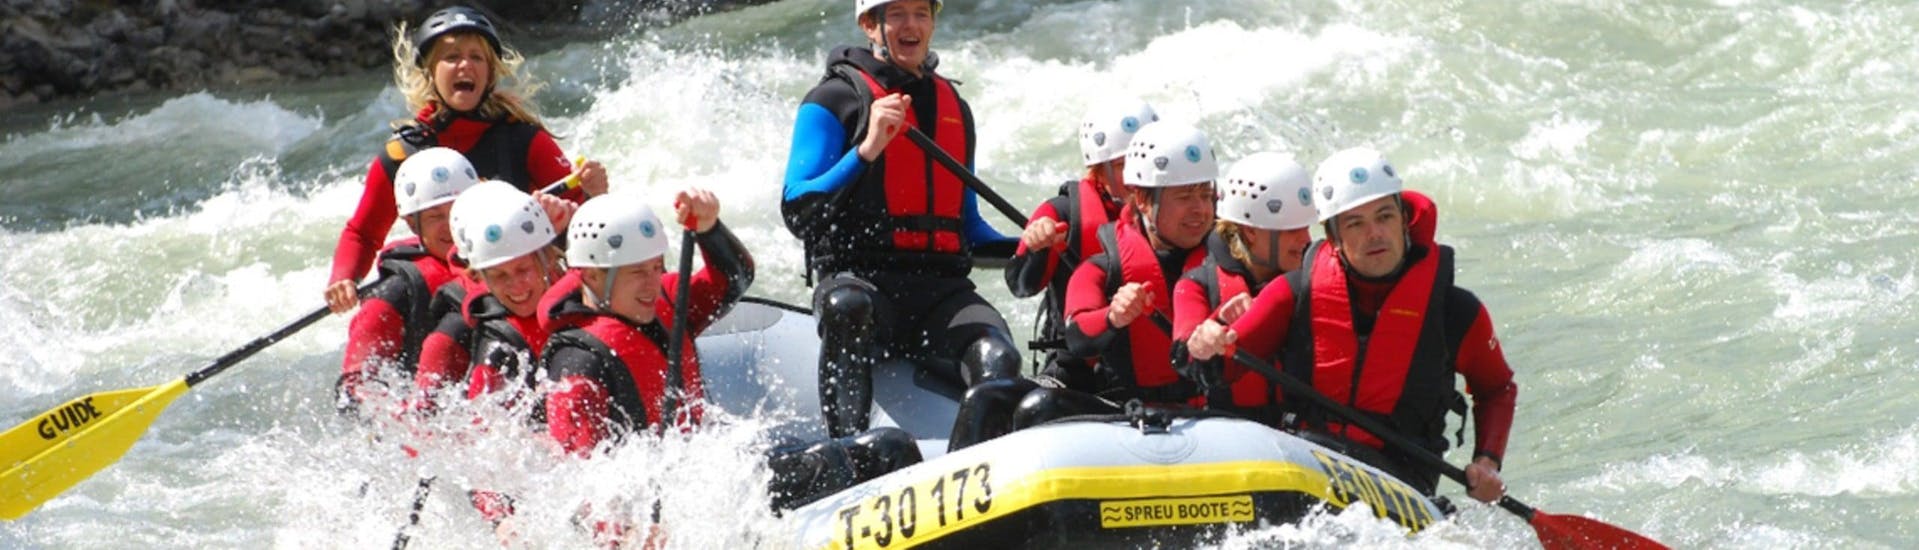 A group of people is navigating their dinghy across the tumultuous rapids of the Inn River during while Rafting in the Imster Schlucht with CanKick Ötztal.